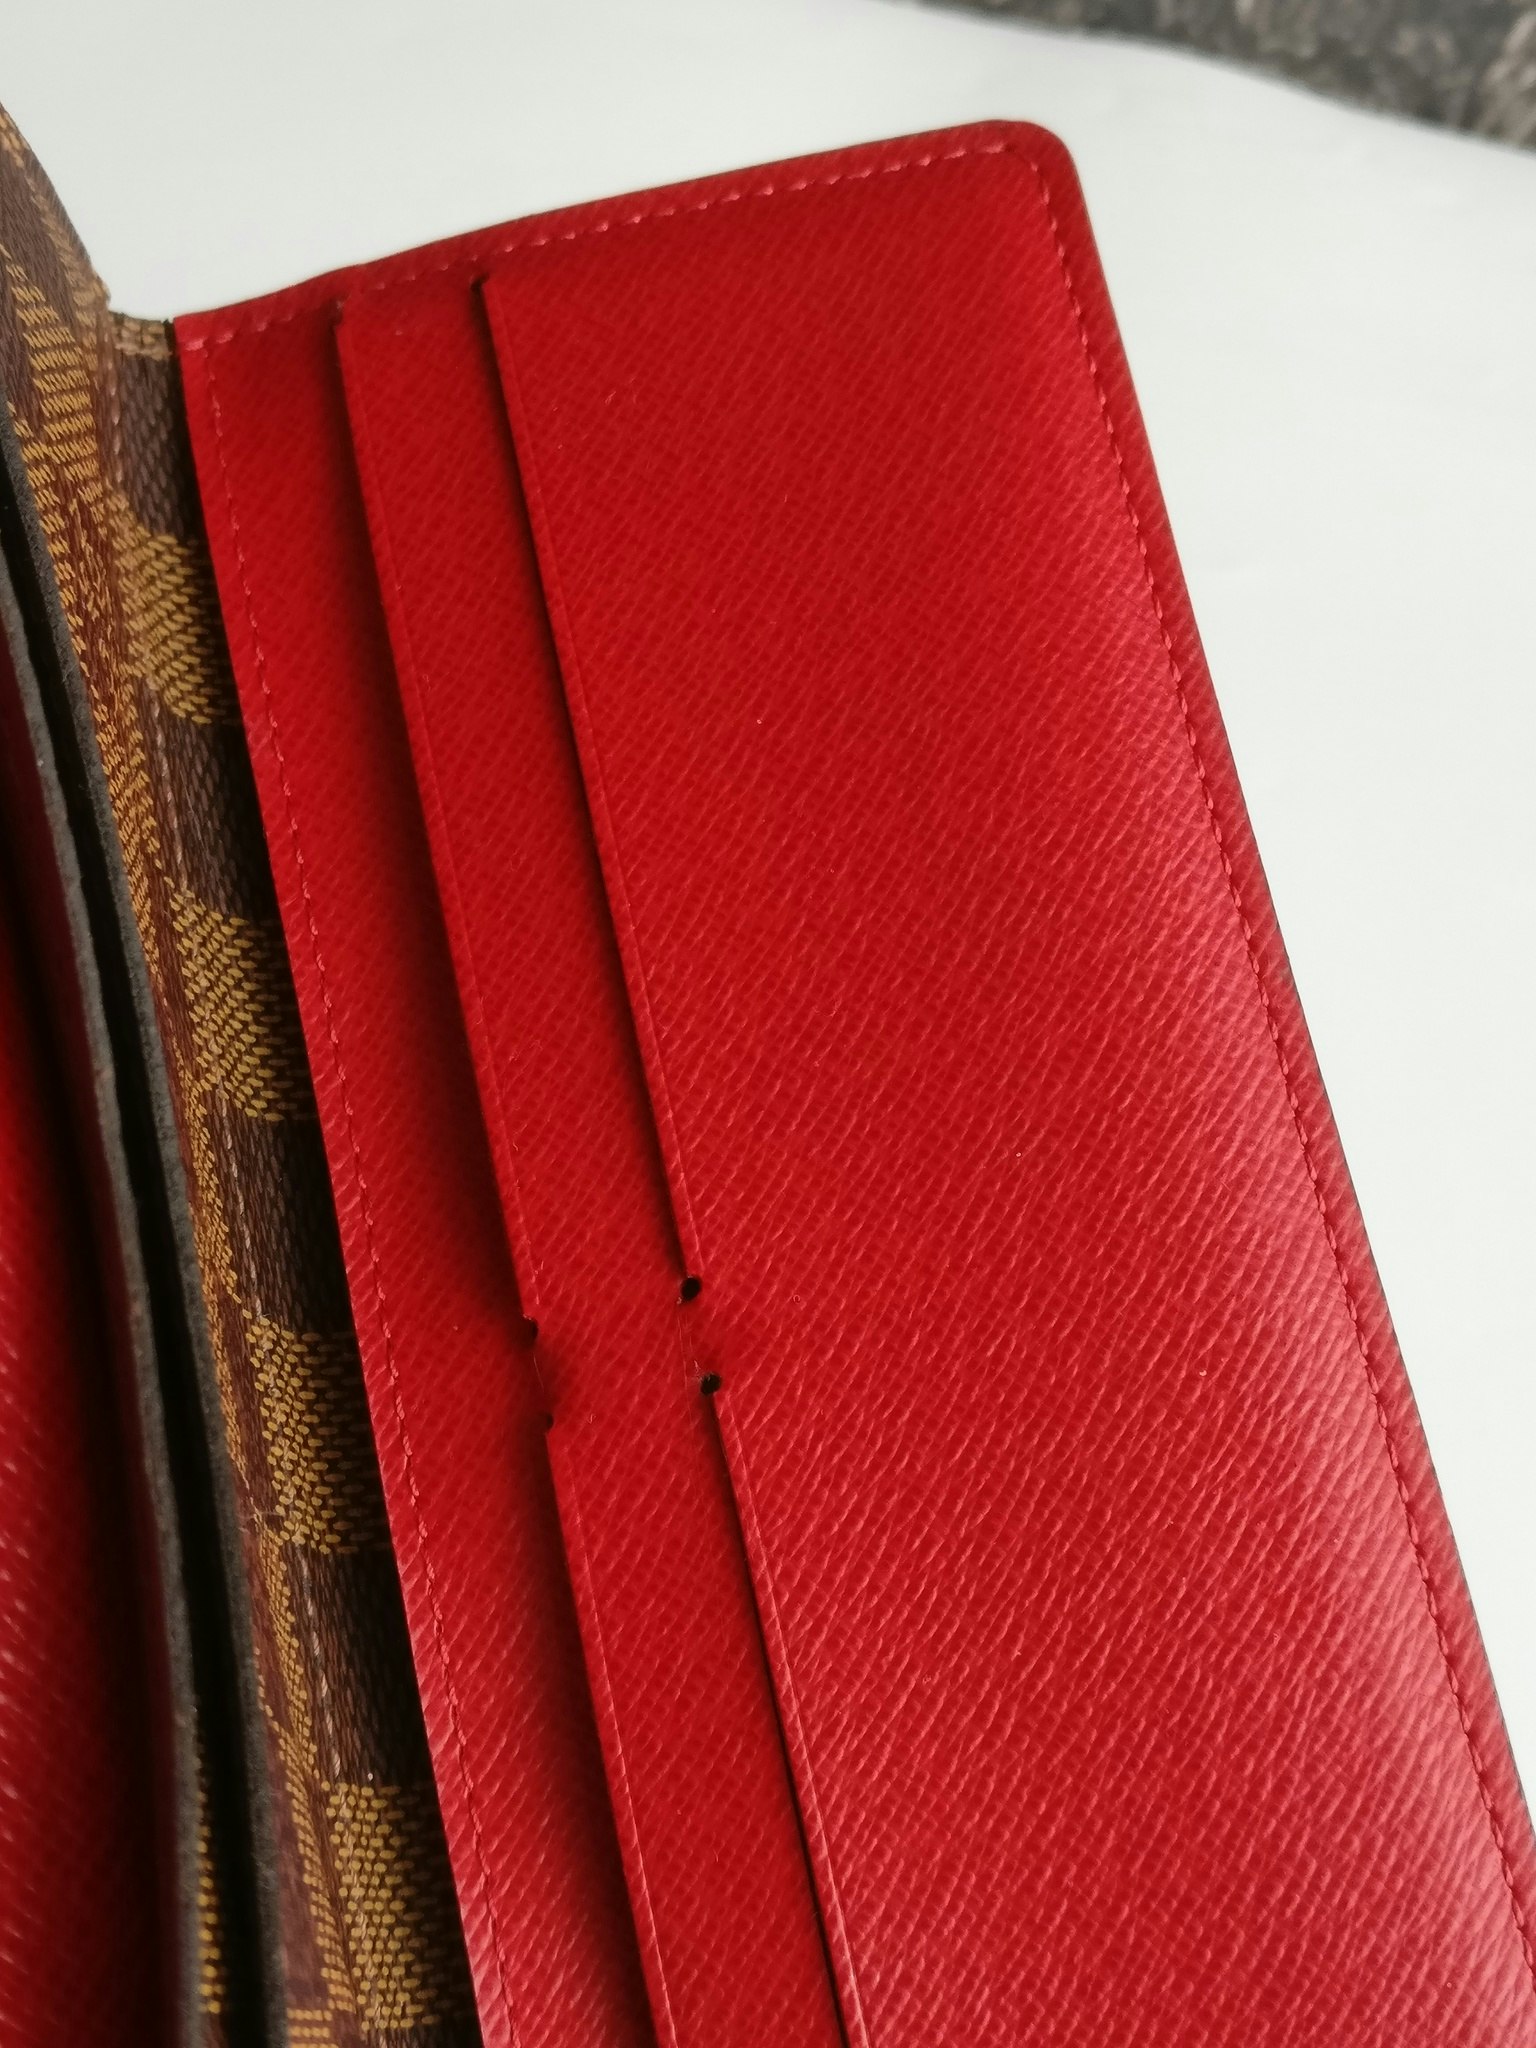 louis vuitton josephine wallet with red interior